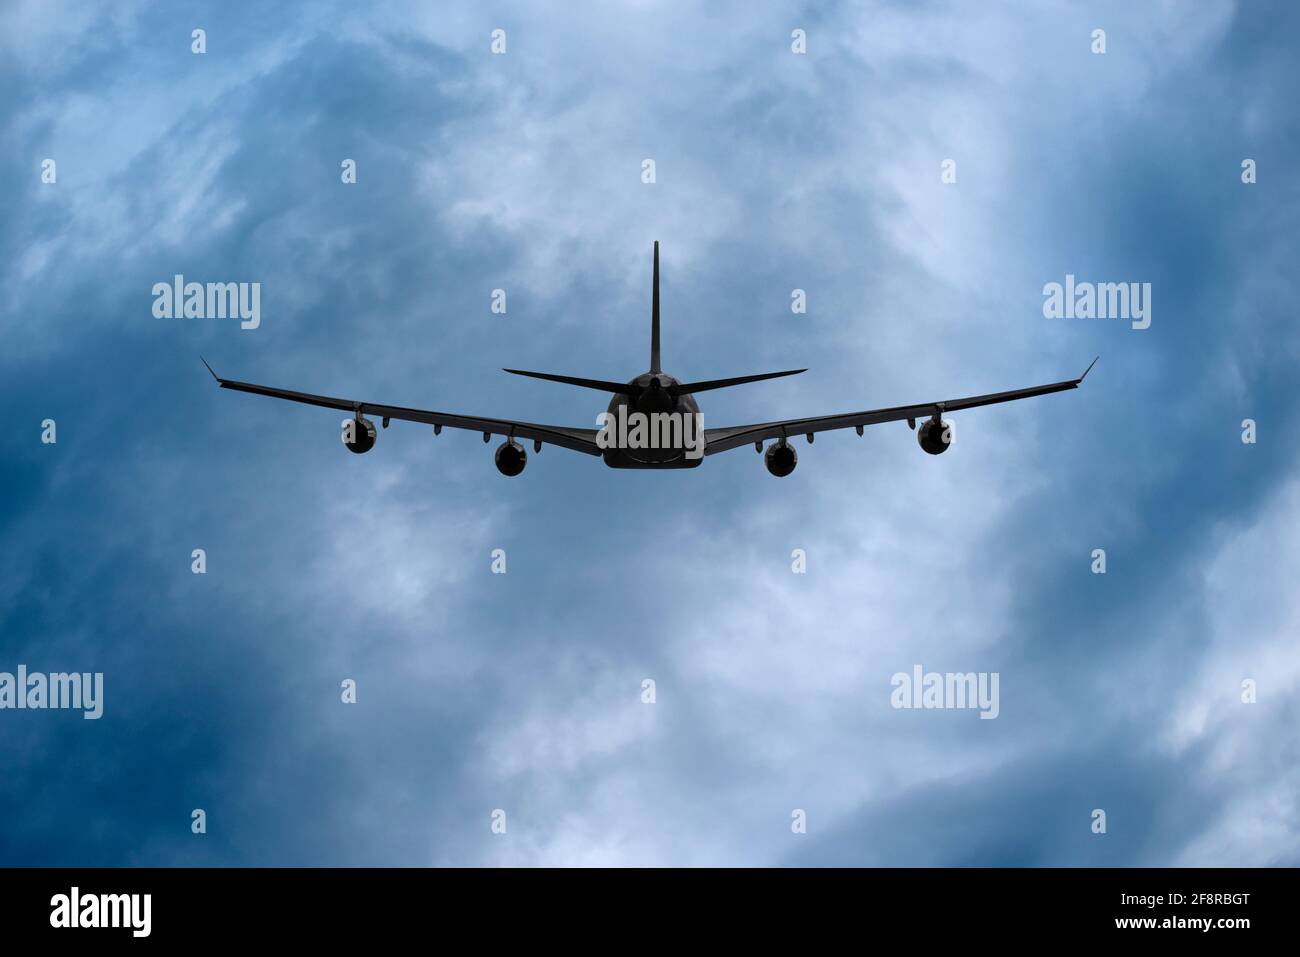 Airplane in Storm Clouds Stock Photo